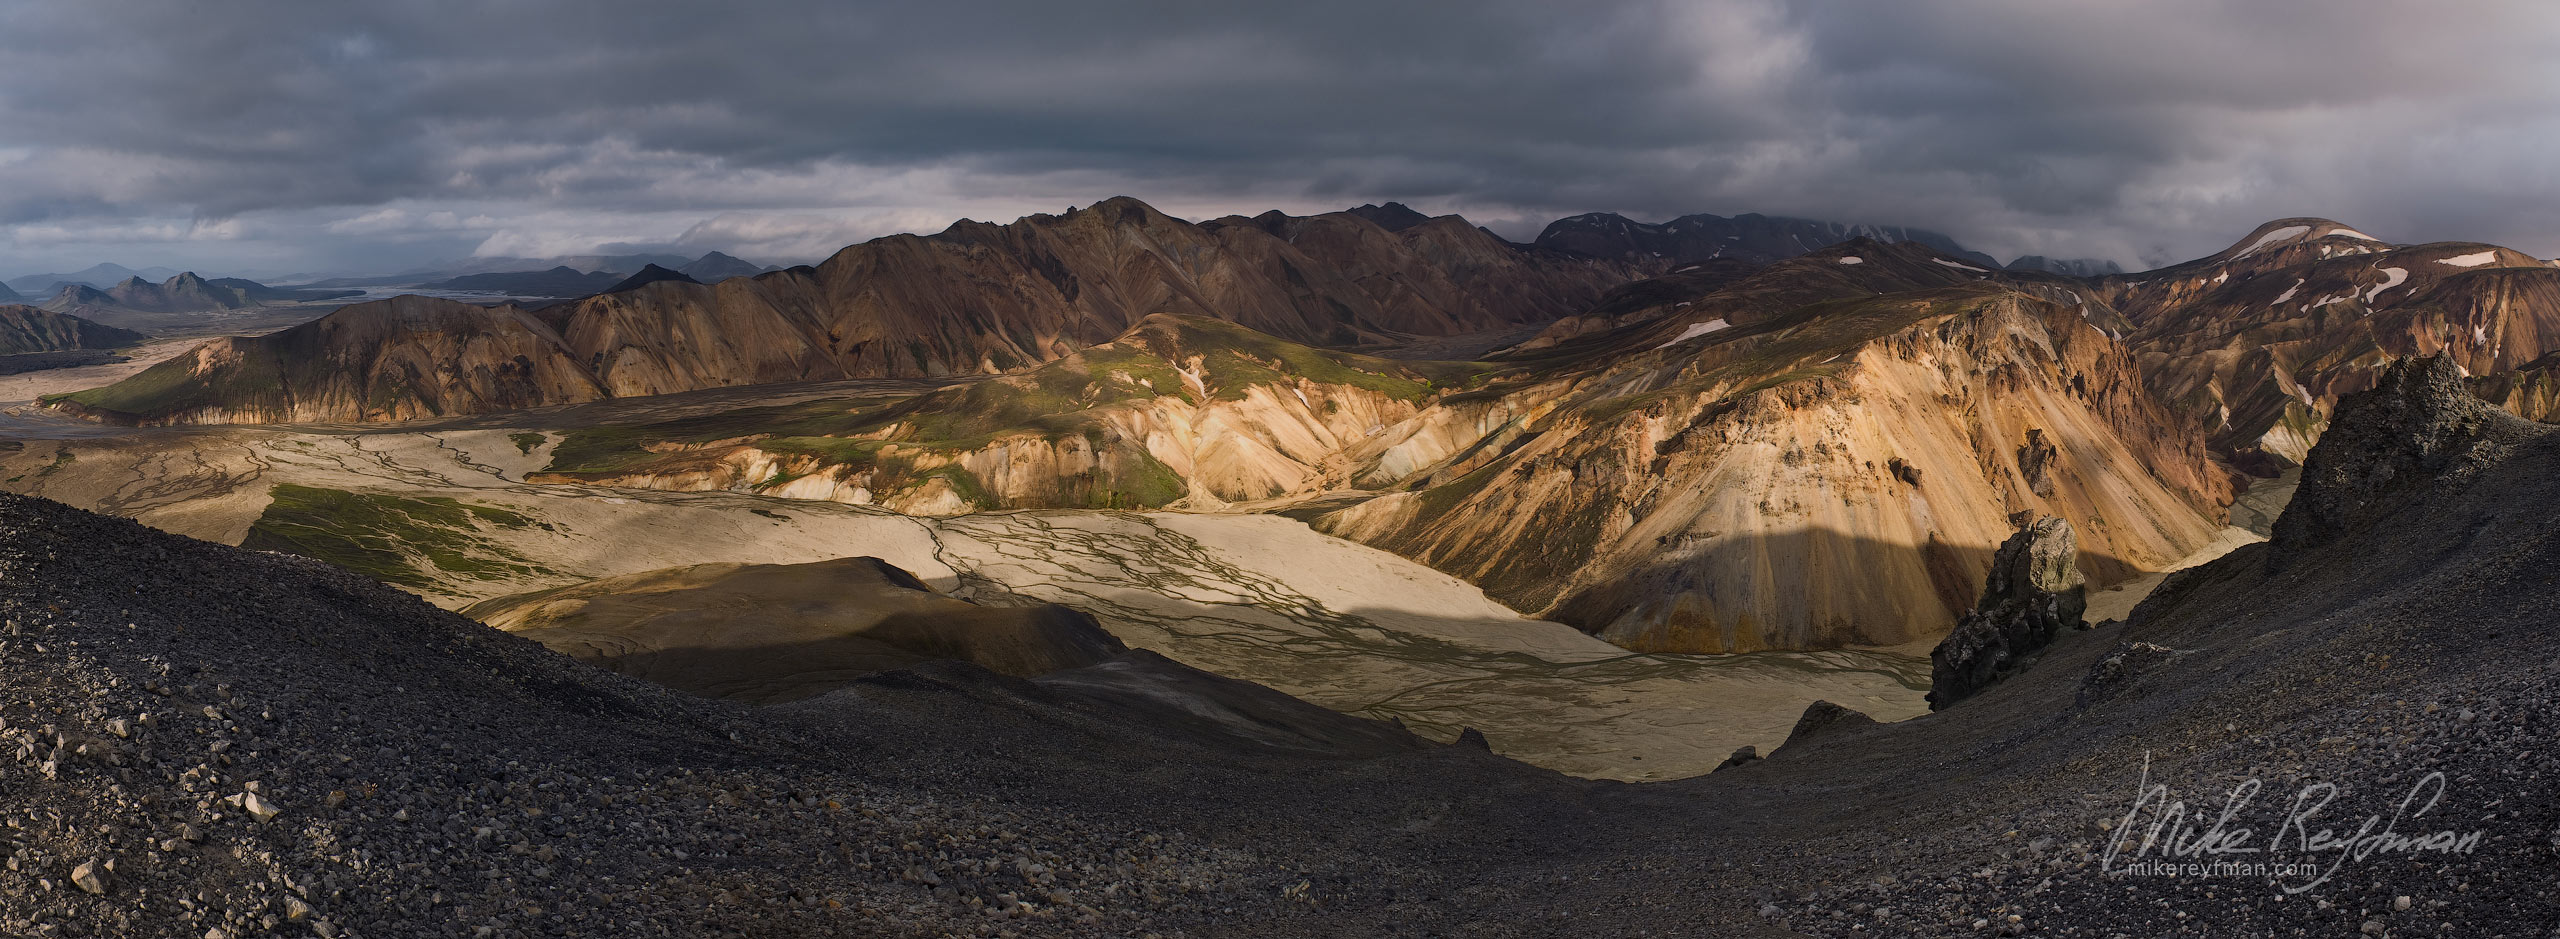 Panoramic view from the top of Mount Bláhnúkur. Landmannalaugar Mountains, Fjallabak Nature Reserve, Central Highlands, Iceland. 021-IC-GP MR28575-78 Pano-1x2.55 - Rhyolite Mountains, Crater Lakes, Geothermal Areas, Lava Fields and Glacial Rivers. Iceland.  - Mike Reyfman Photography